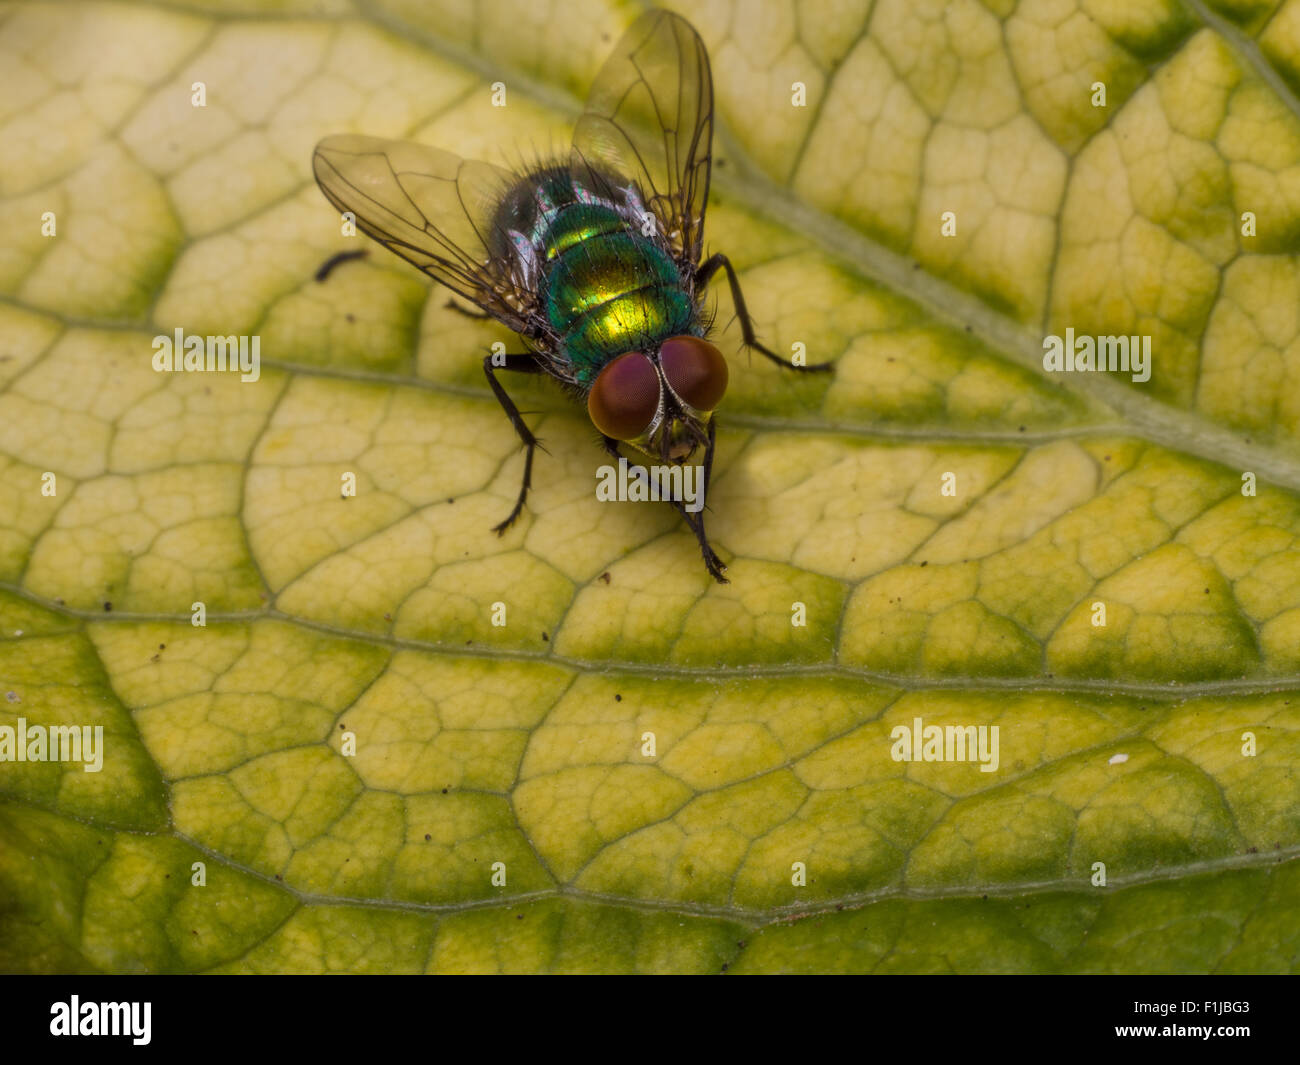 A Greenbottle or Lucilia Caesar Blowfly perched on a yellow and green leaf. Stock Photo